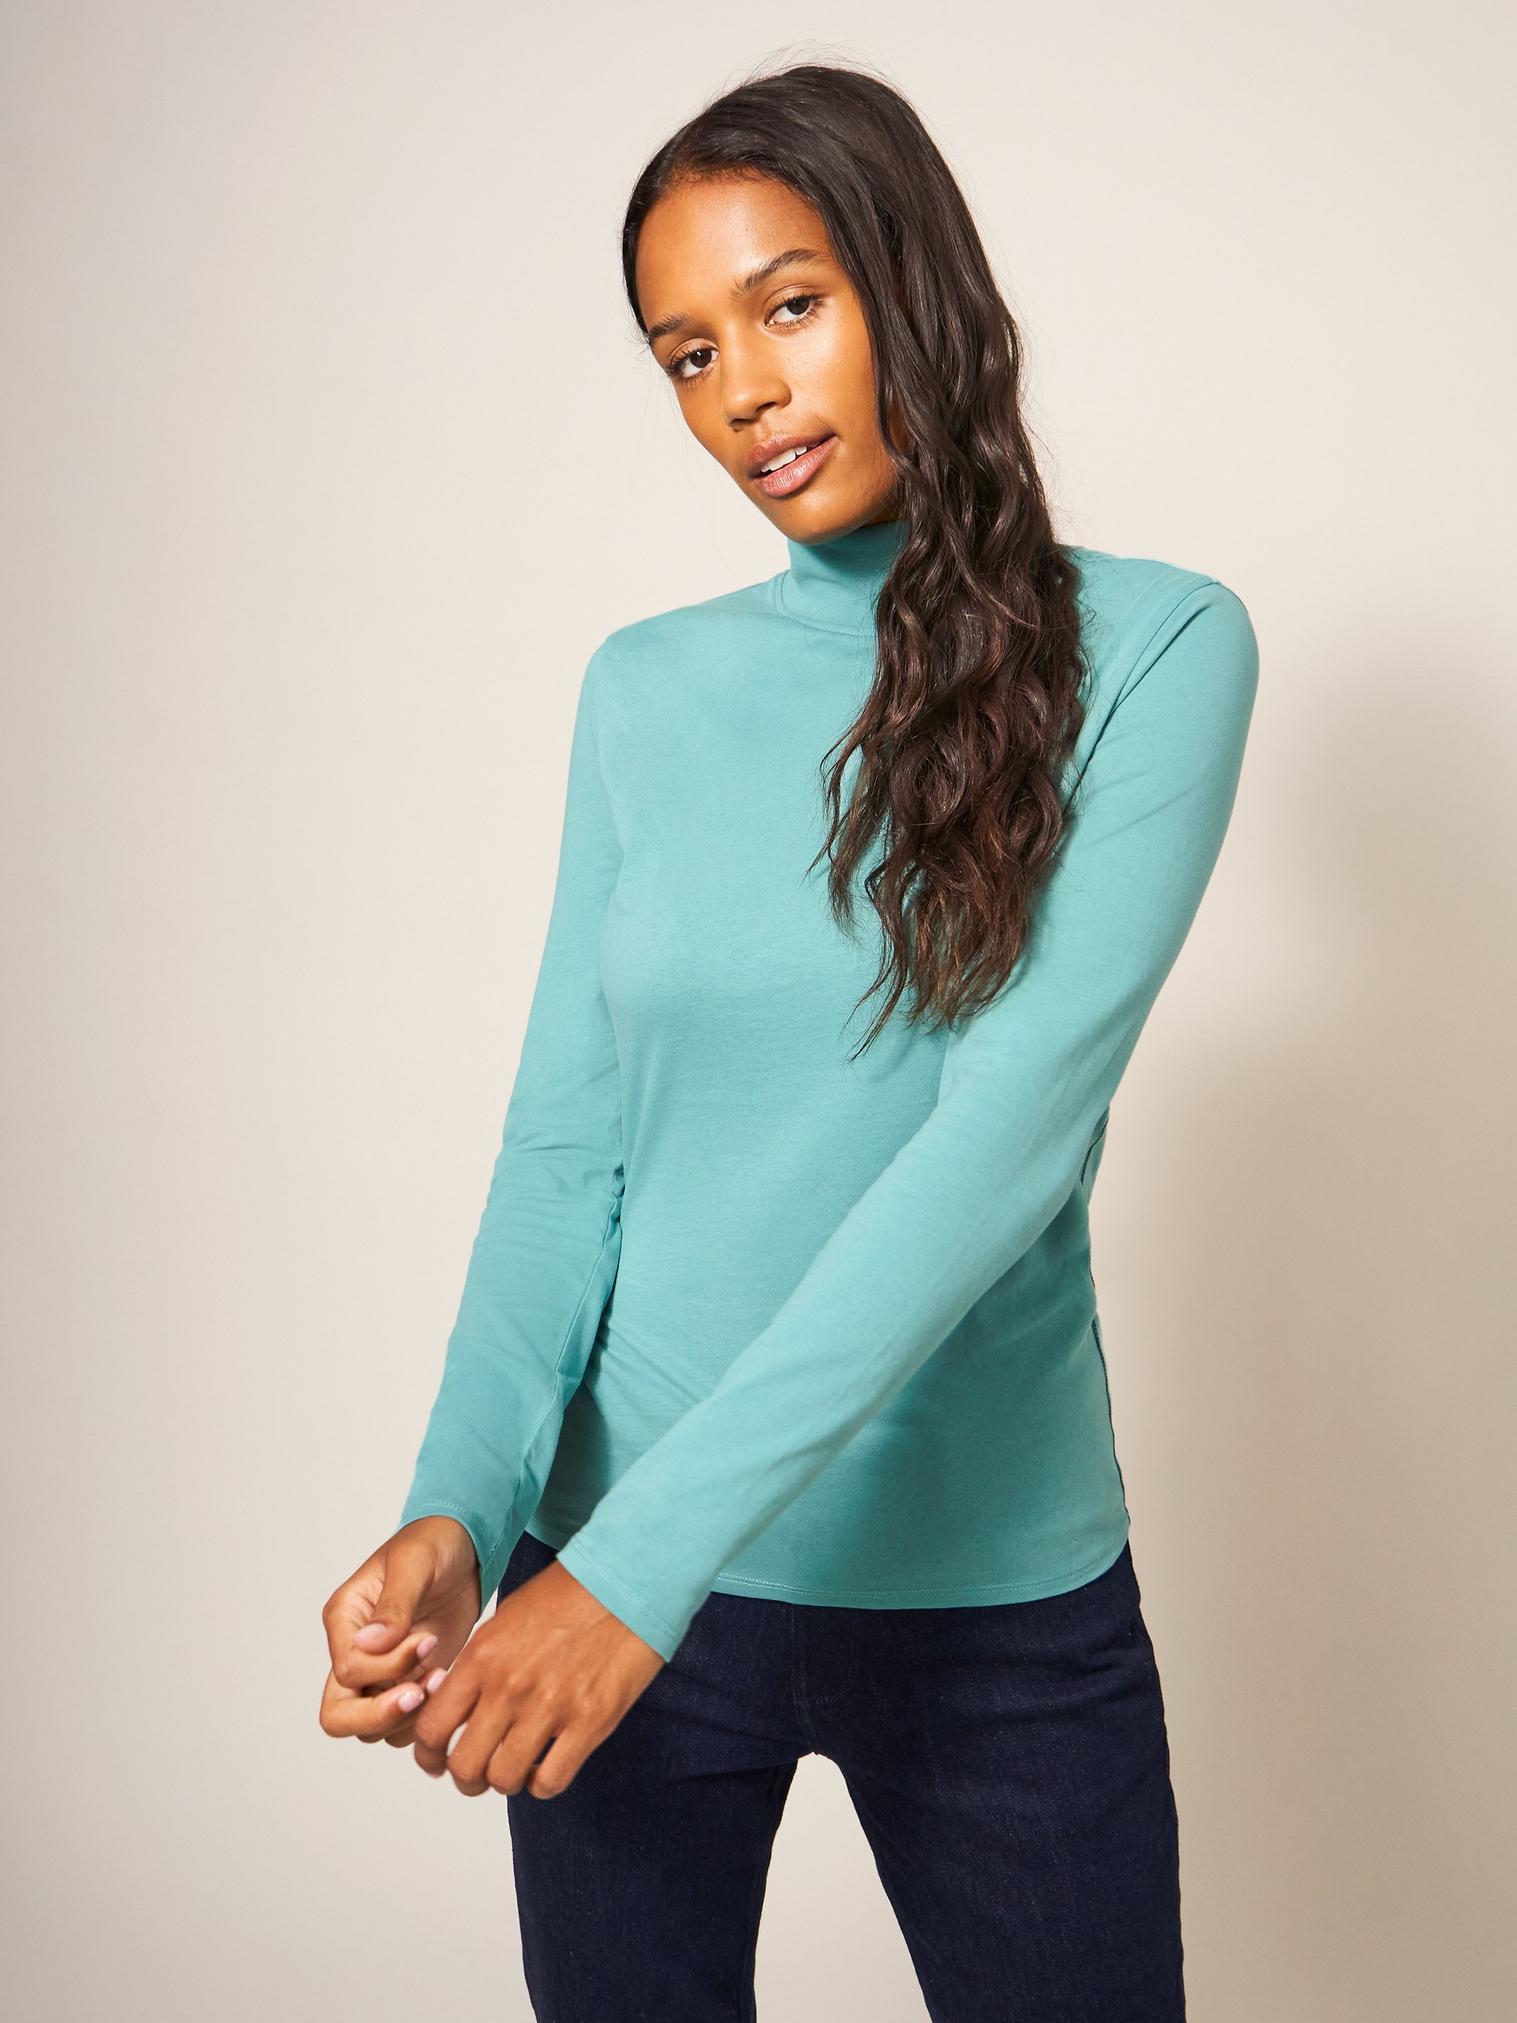 CAMILE HIGH NECK TEE in LGT TEAL - LIFESTYLE